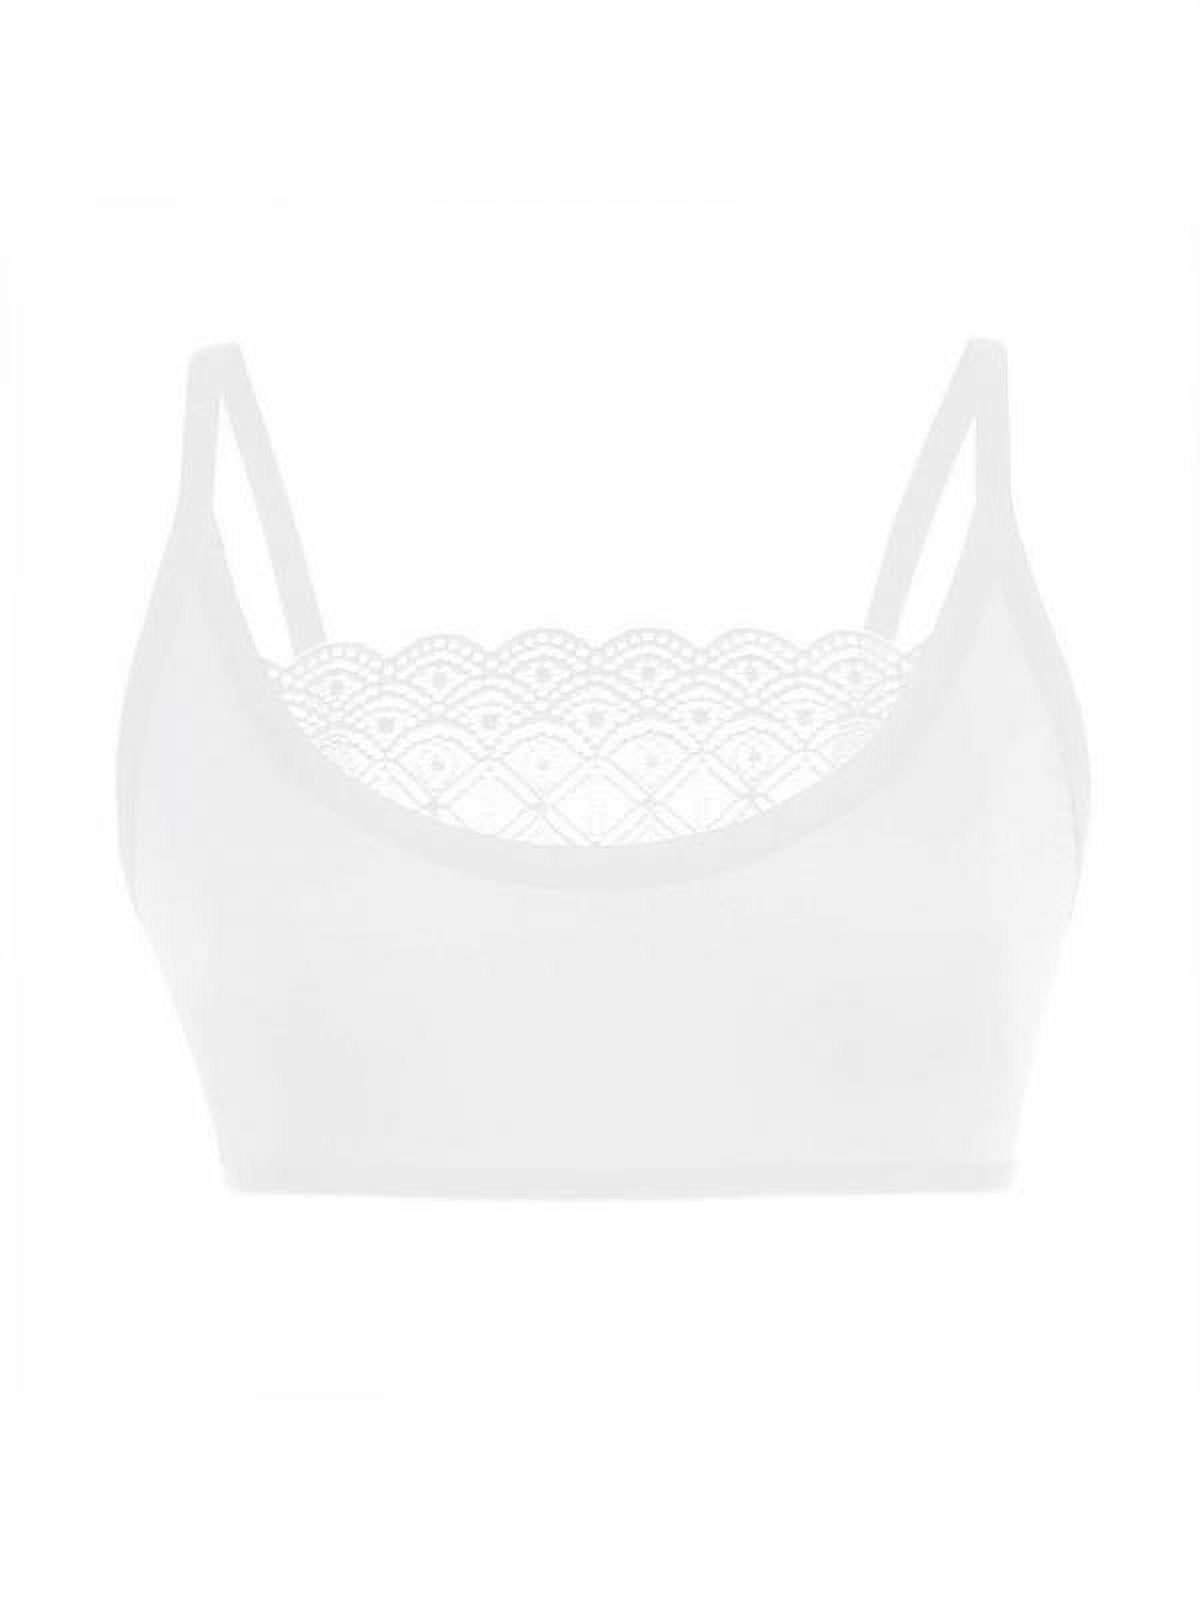 Lolmot Ladies Sexy Brassiere Fun Big Backless Perspective